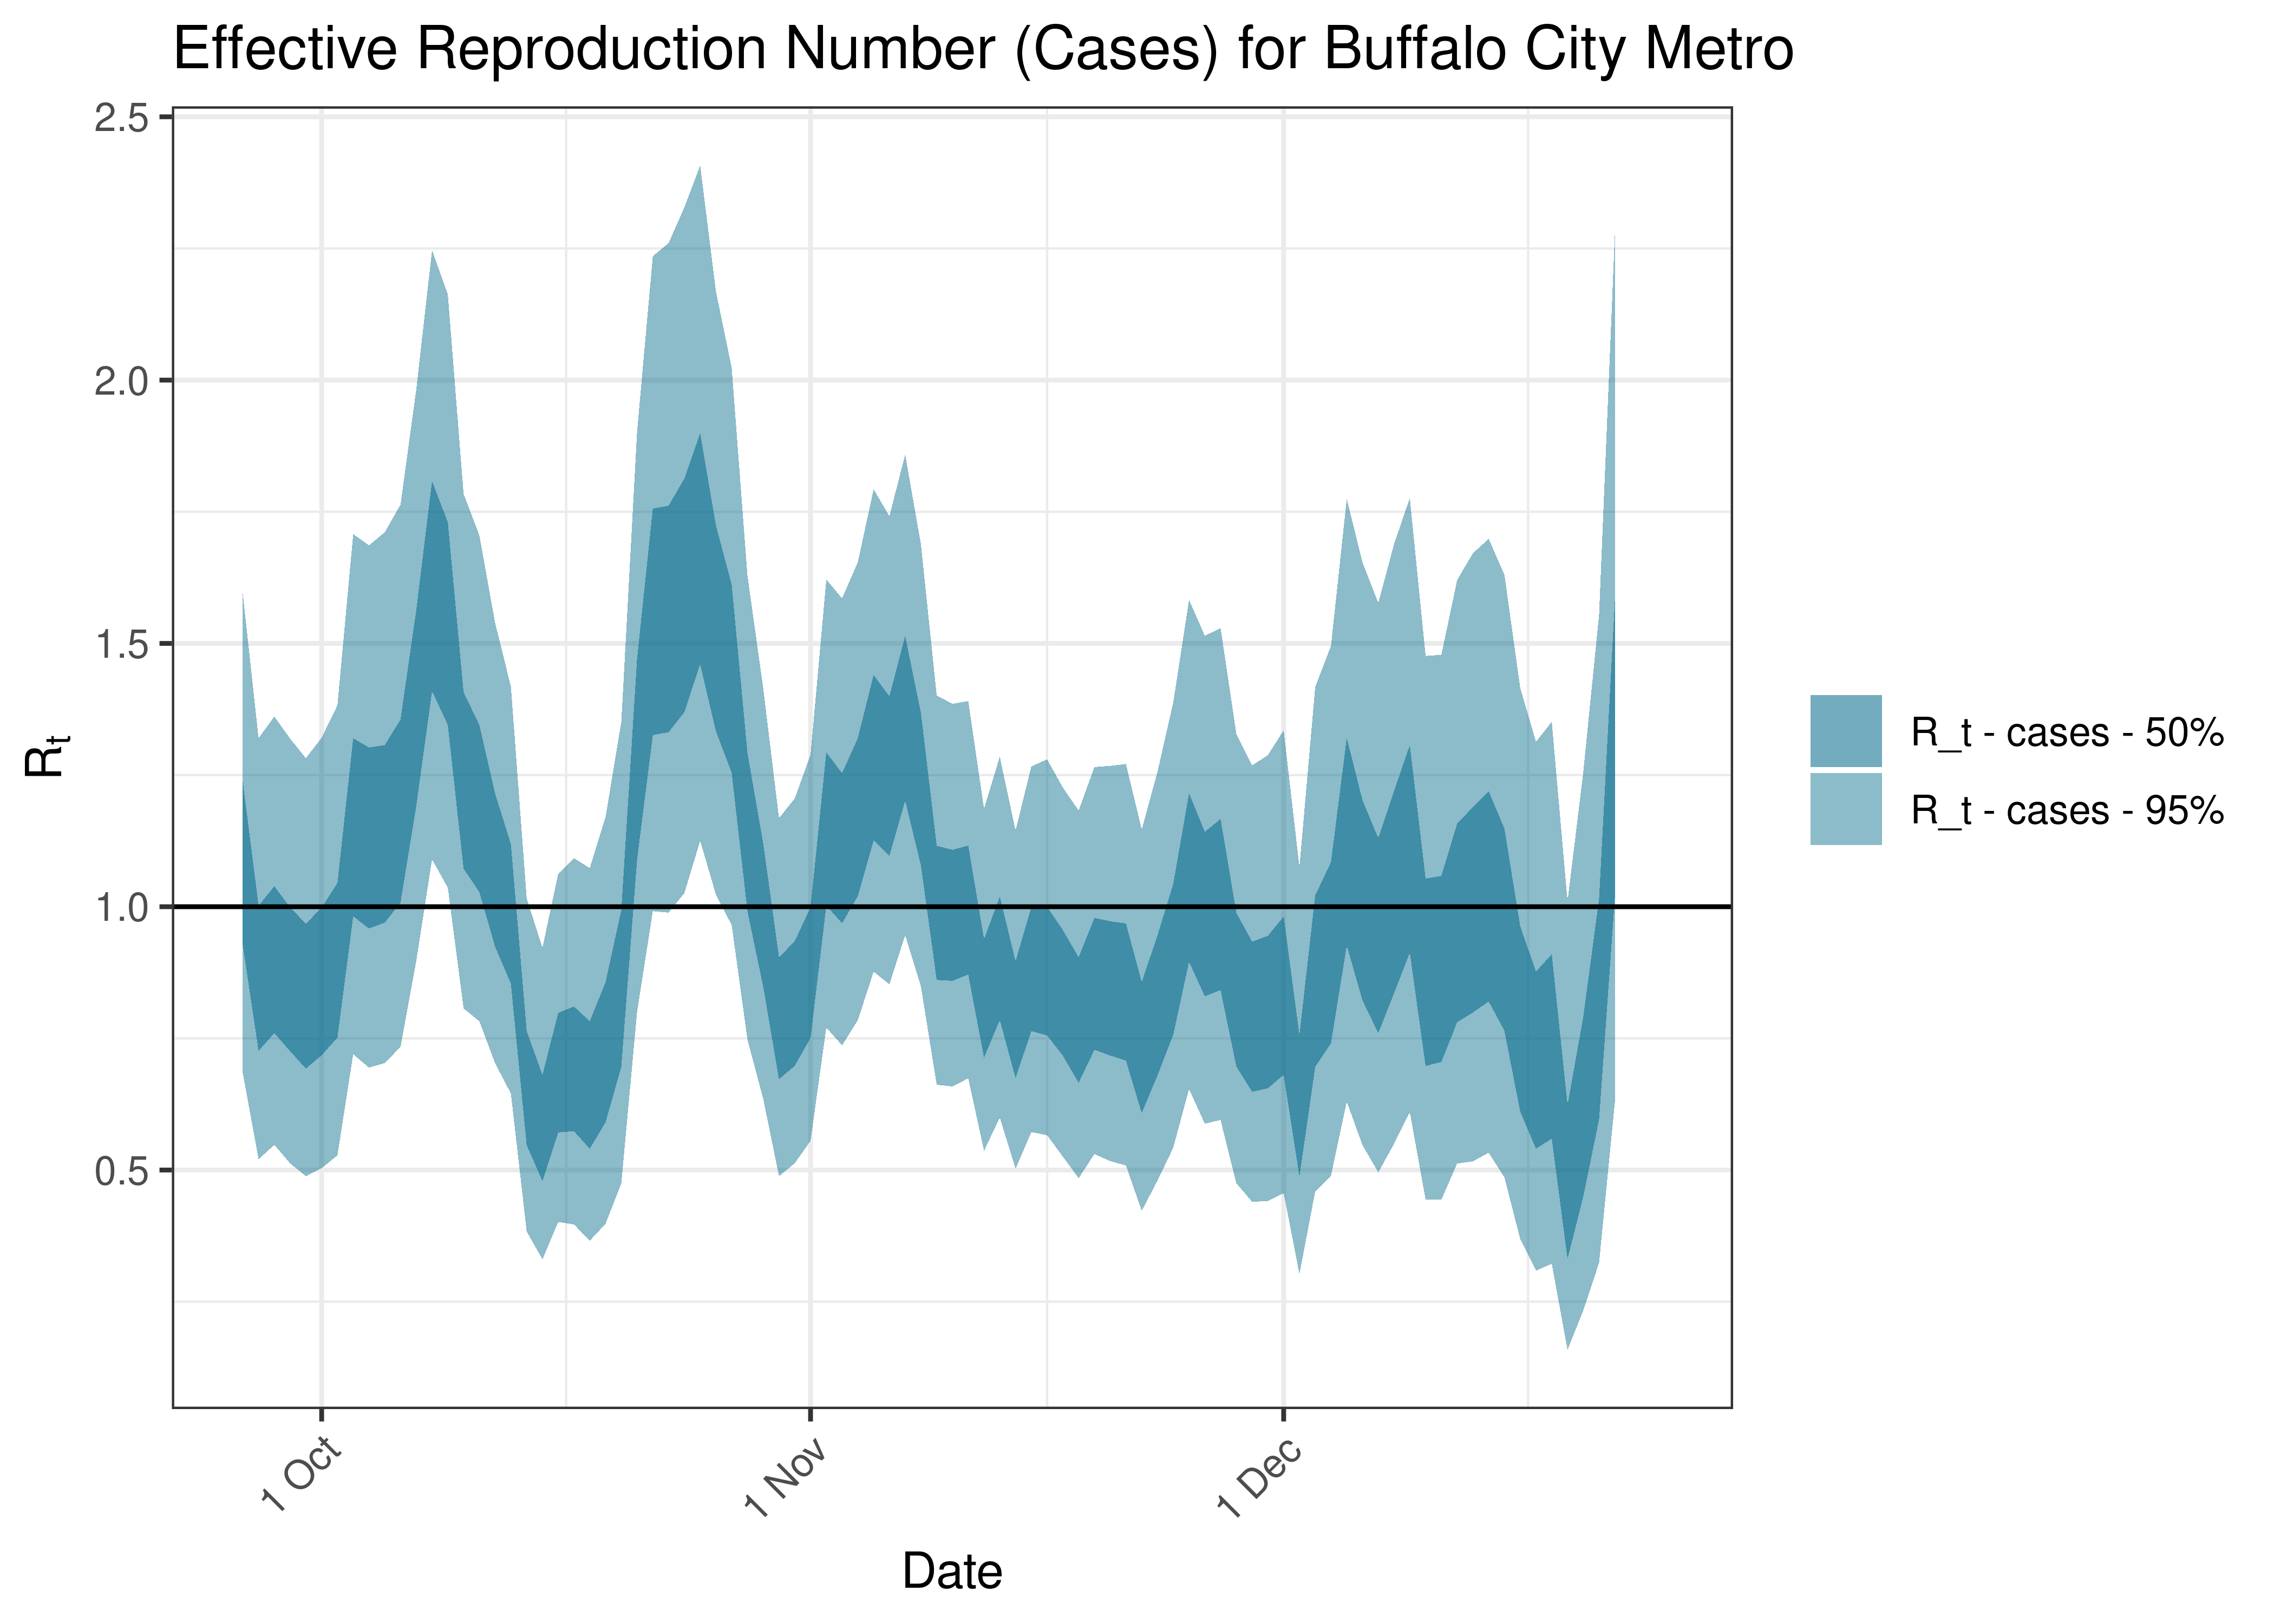 Estimated Effective Reproduction Number Based on Cases for Buffalo City Metro over last 90 days